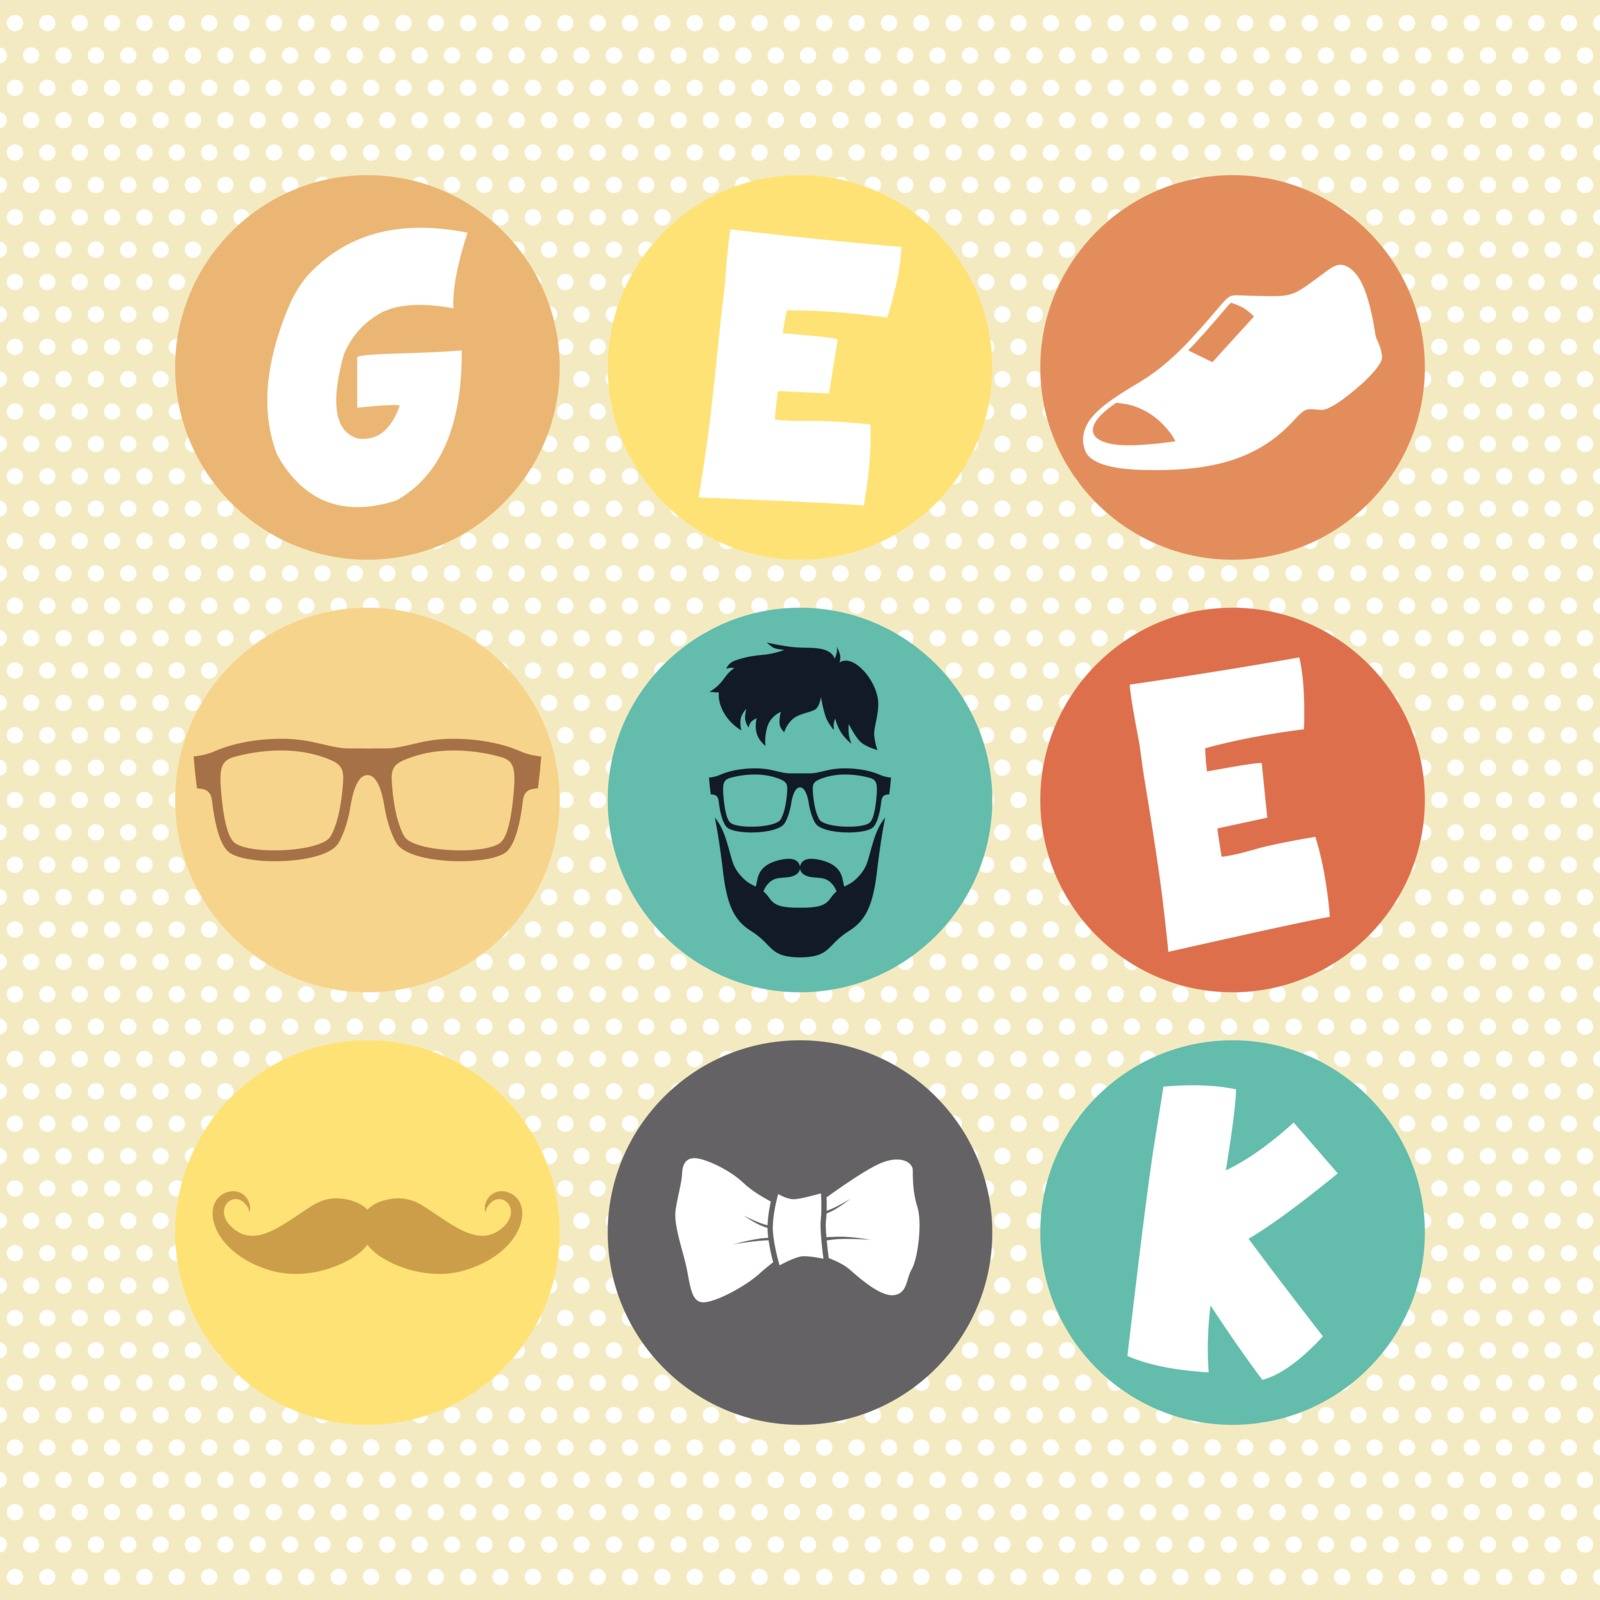 hipster retro geek by vector1st